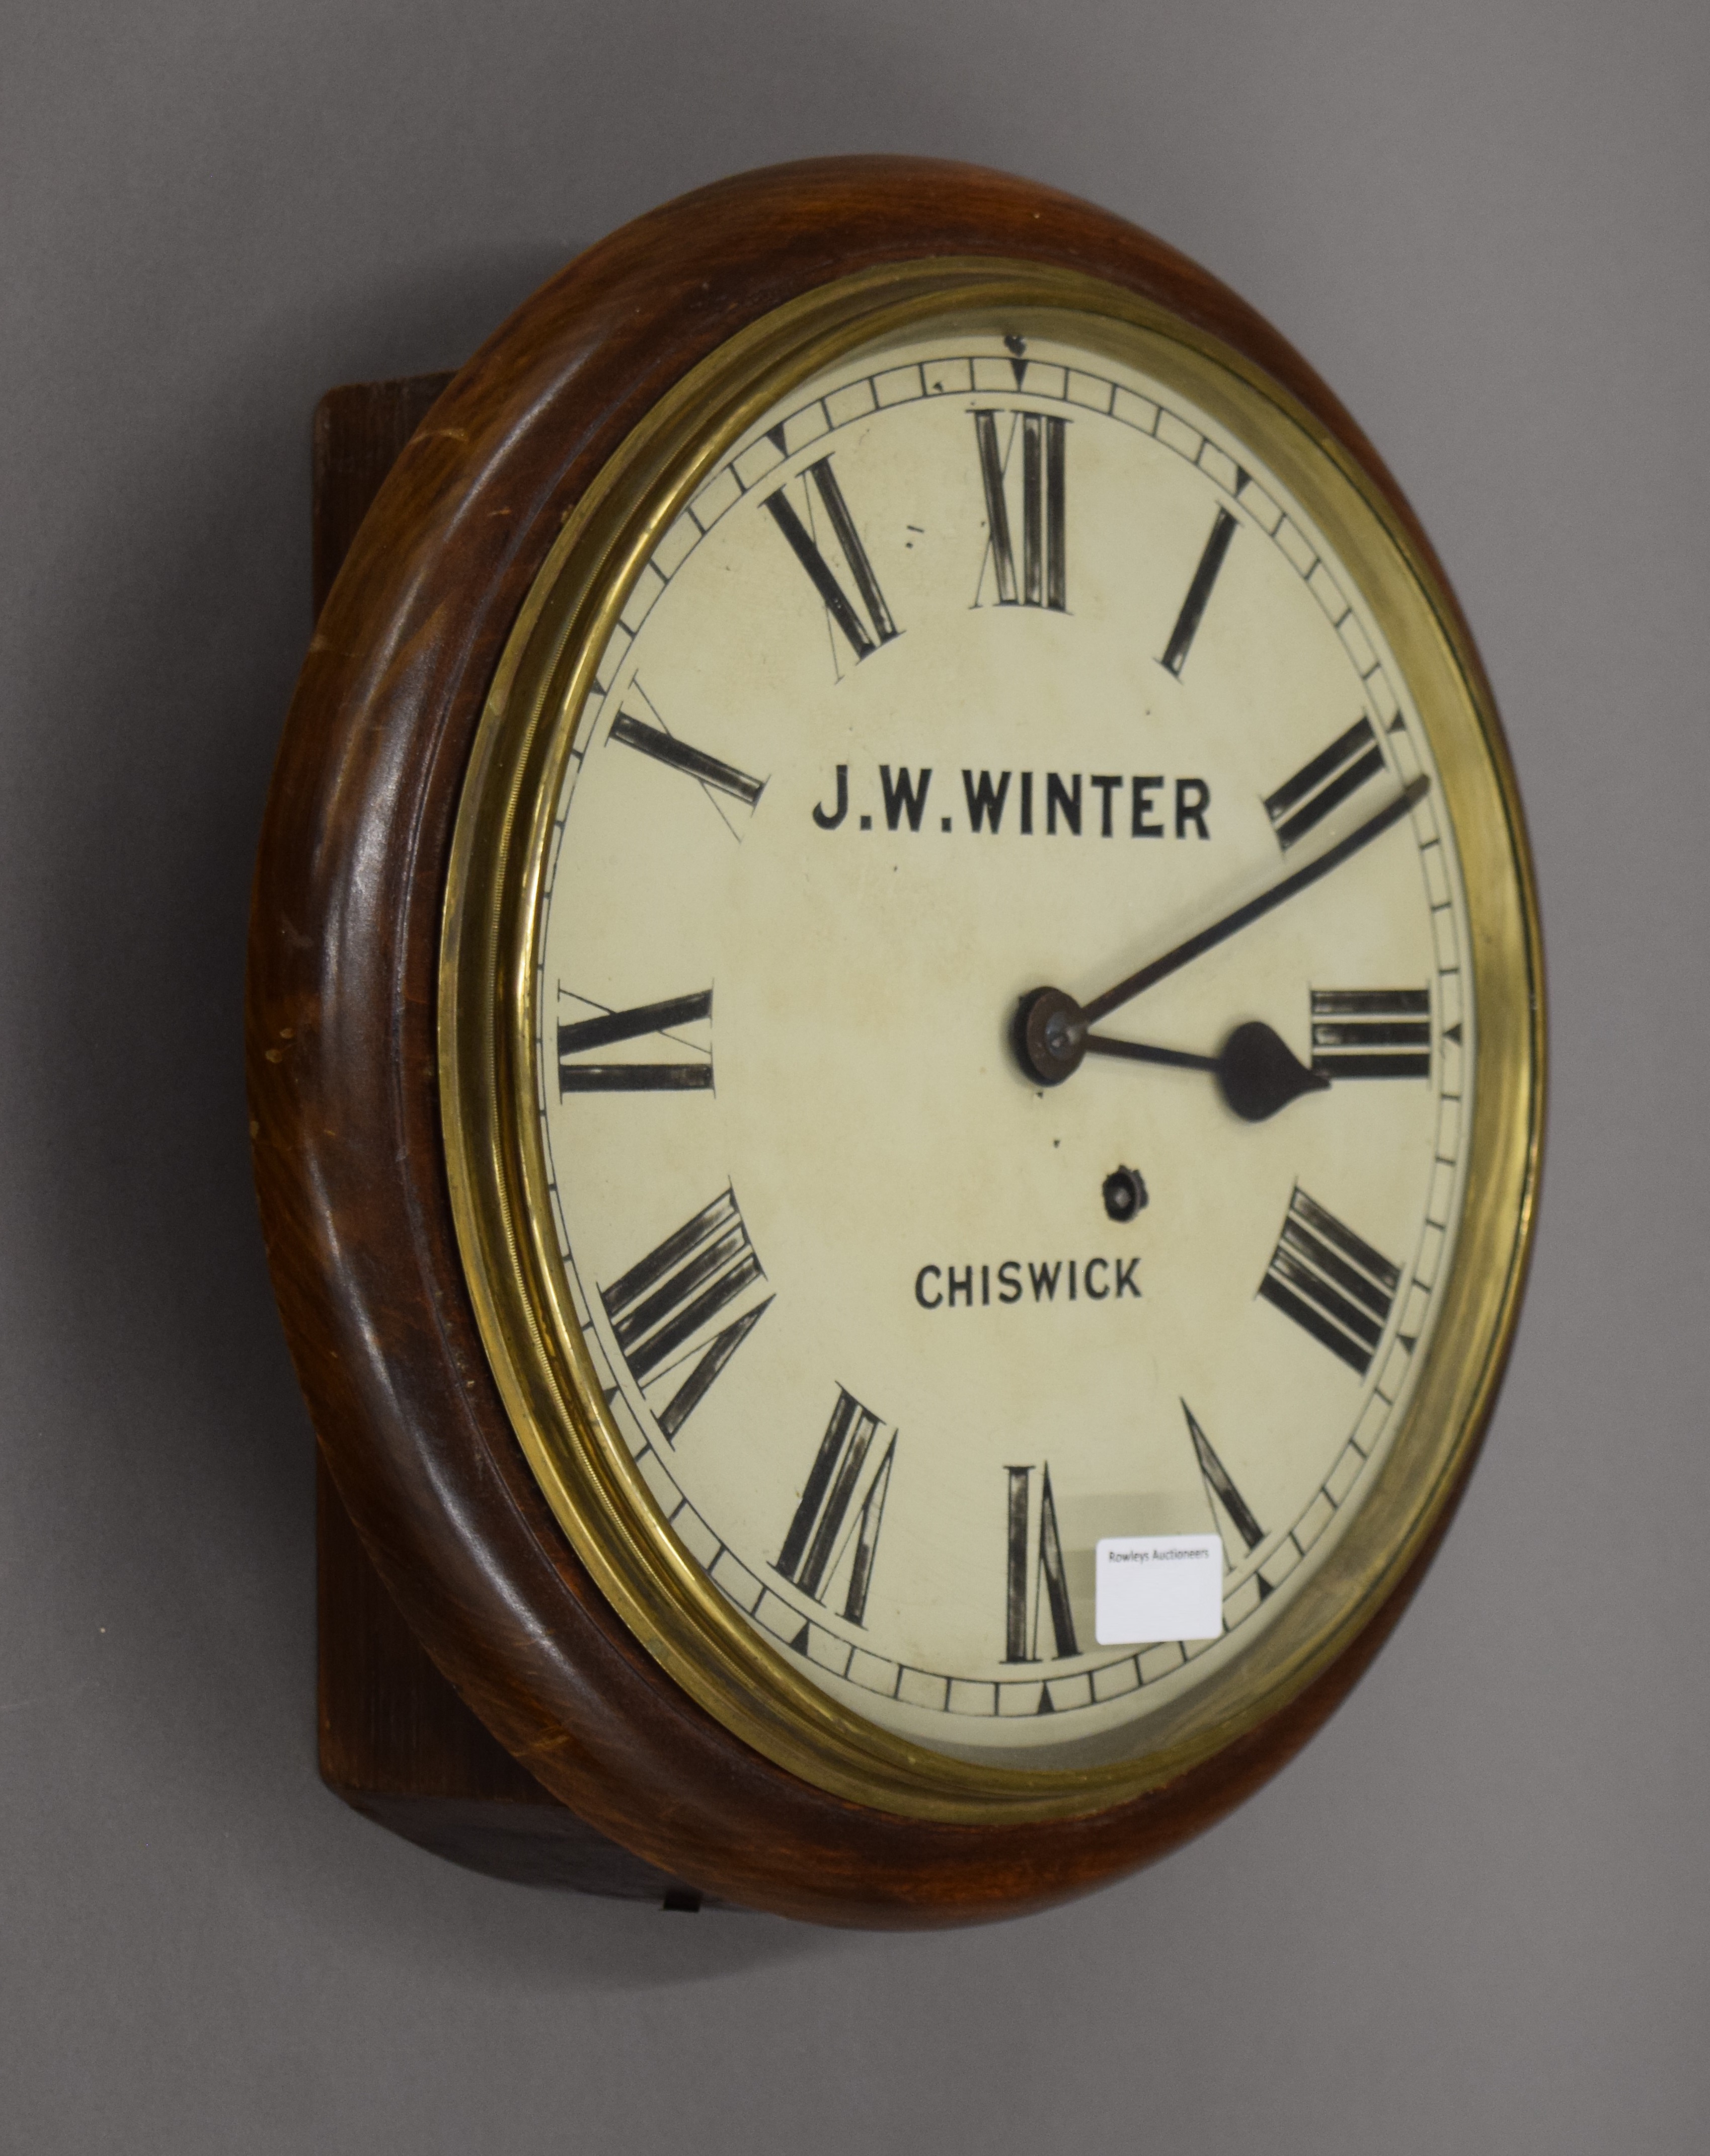 A dial clock, the face inscribed J W Winter, Chiswick. 37 cm diameter.